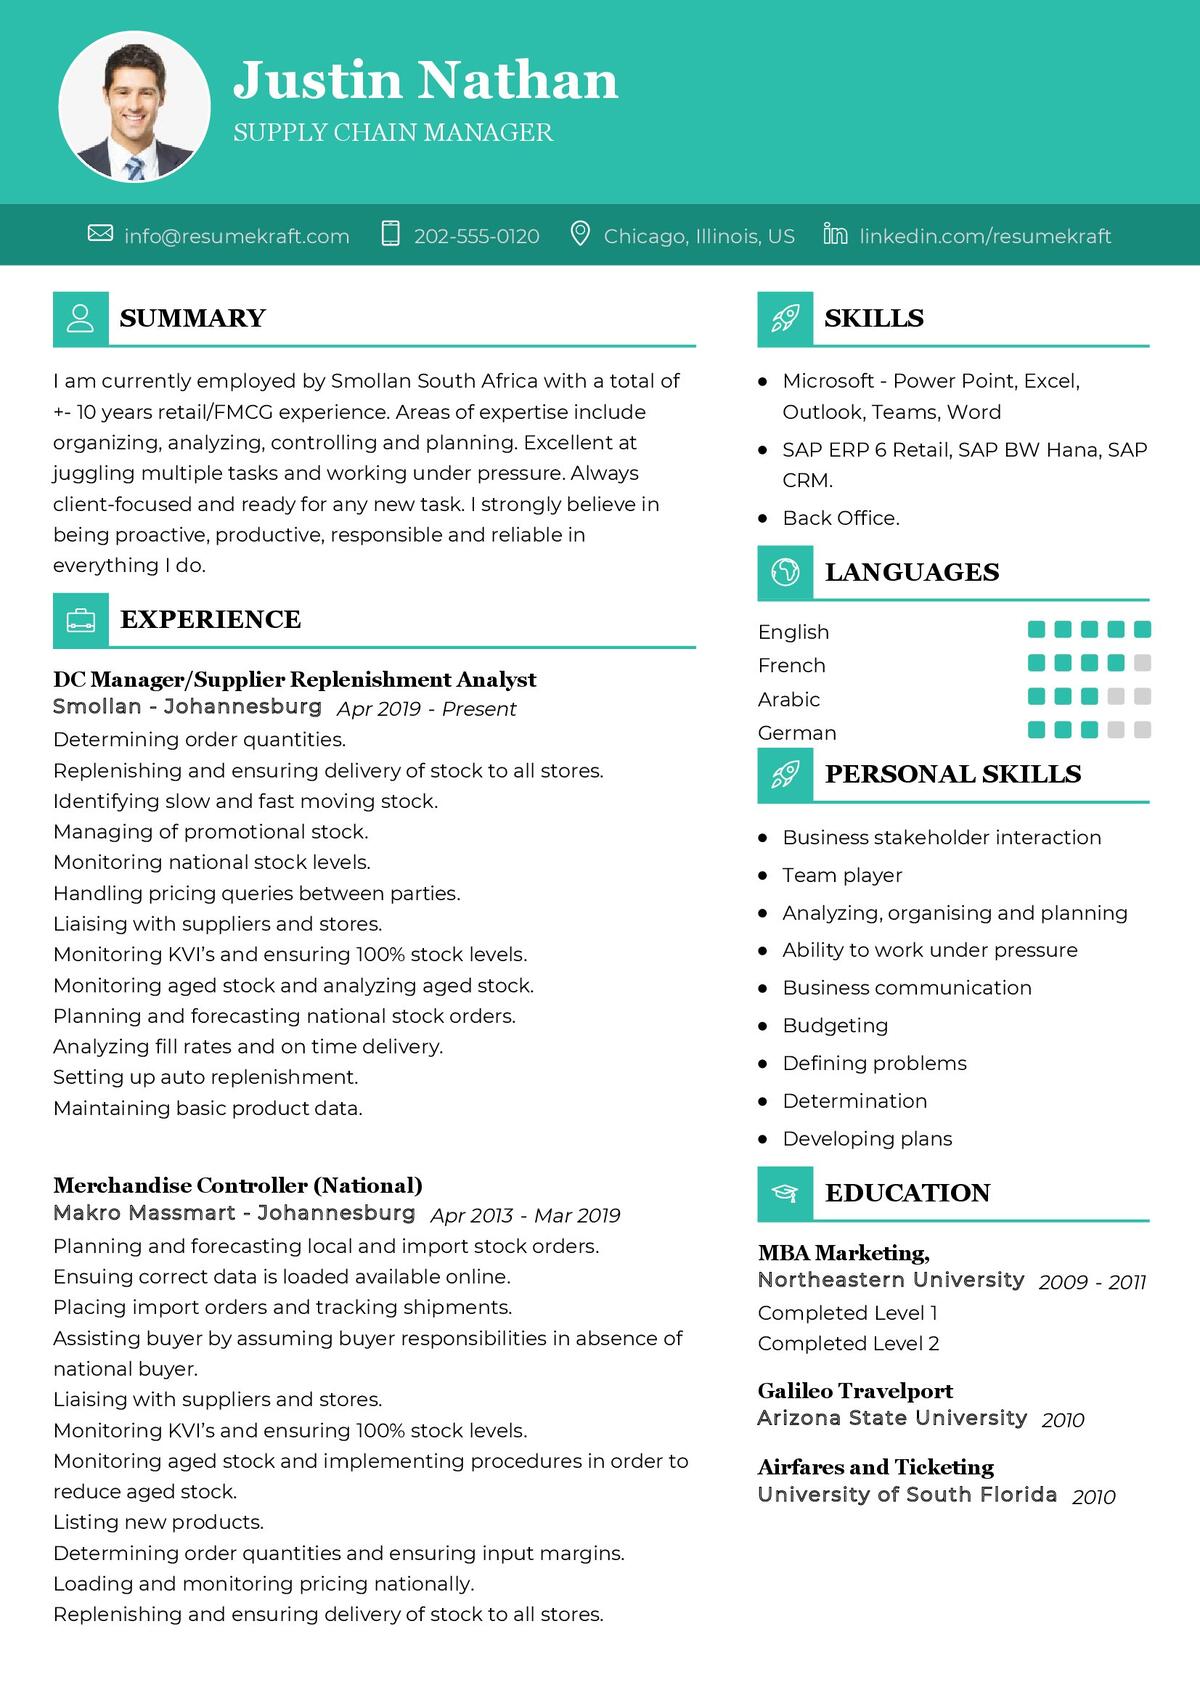 supply chain manager objective in resume